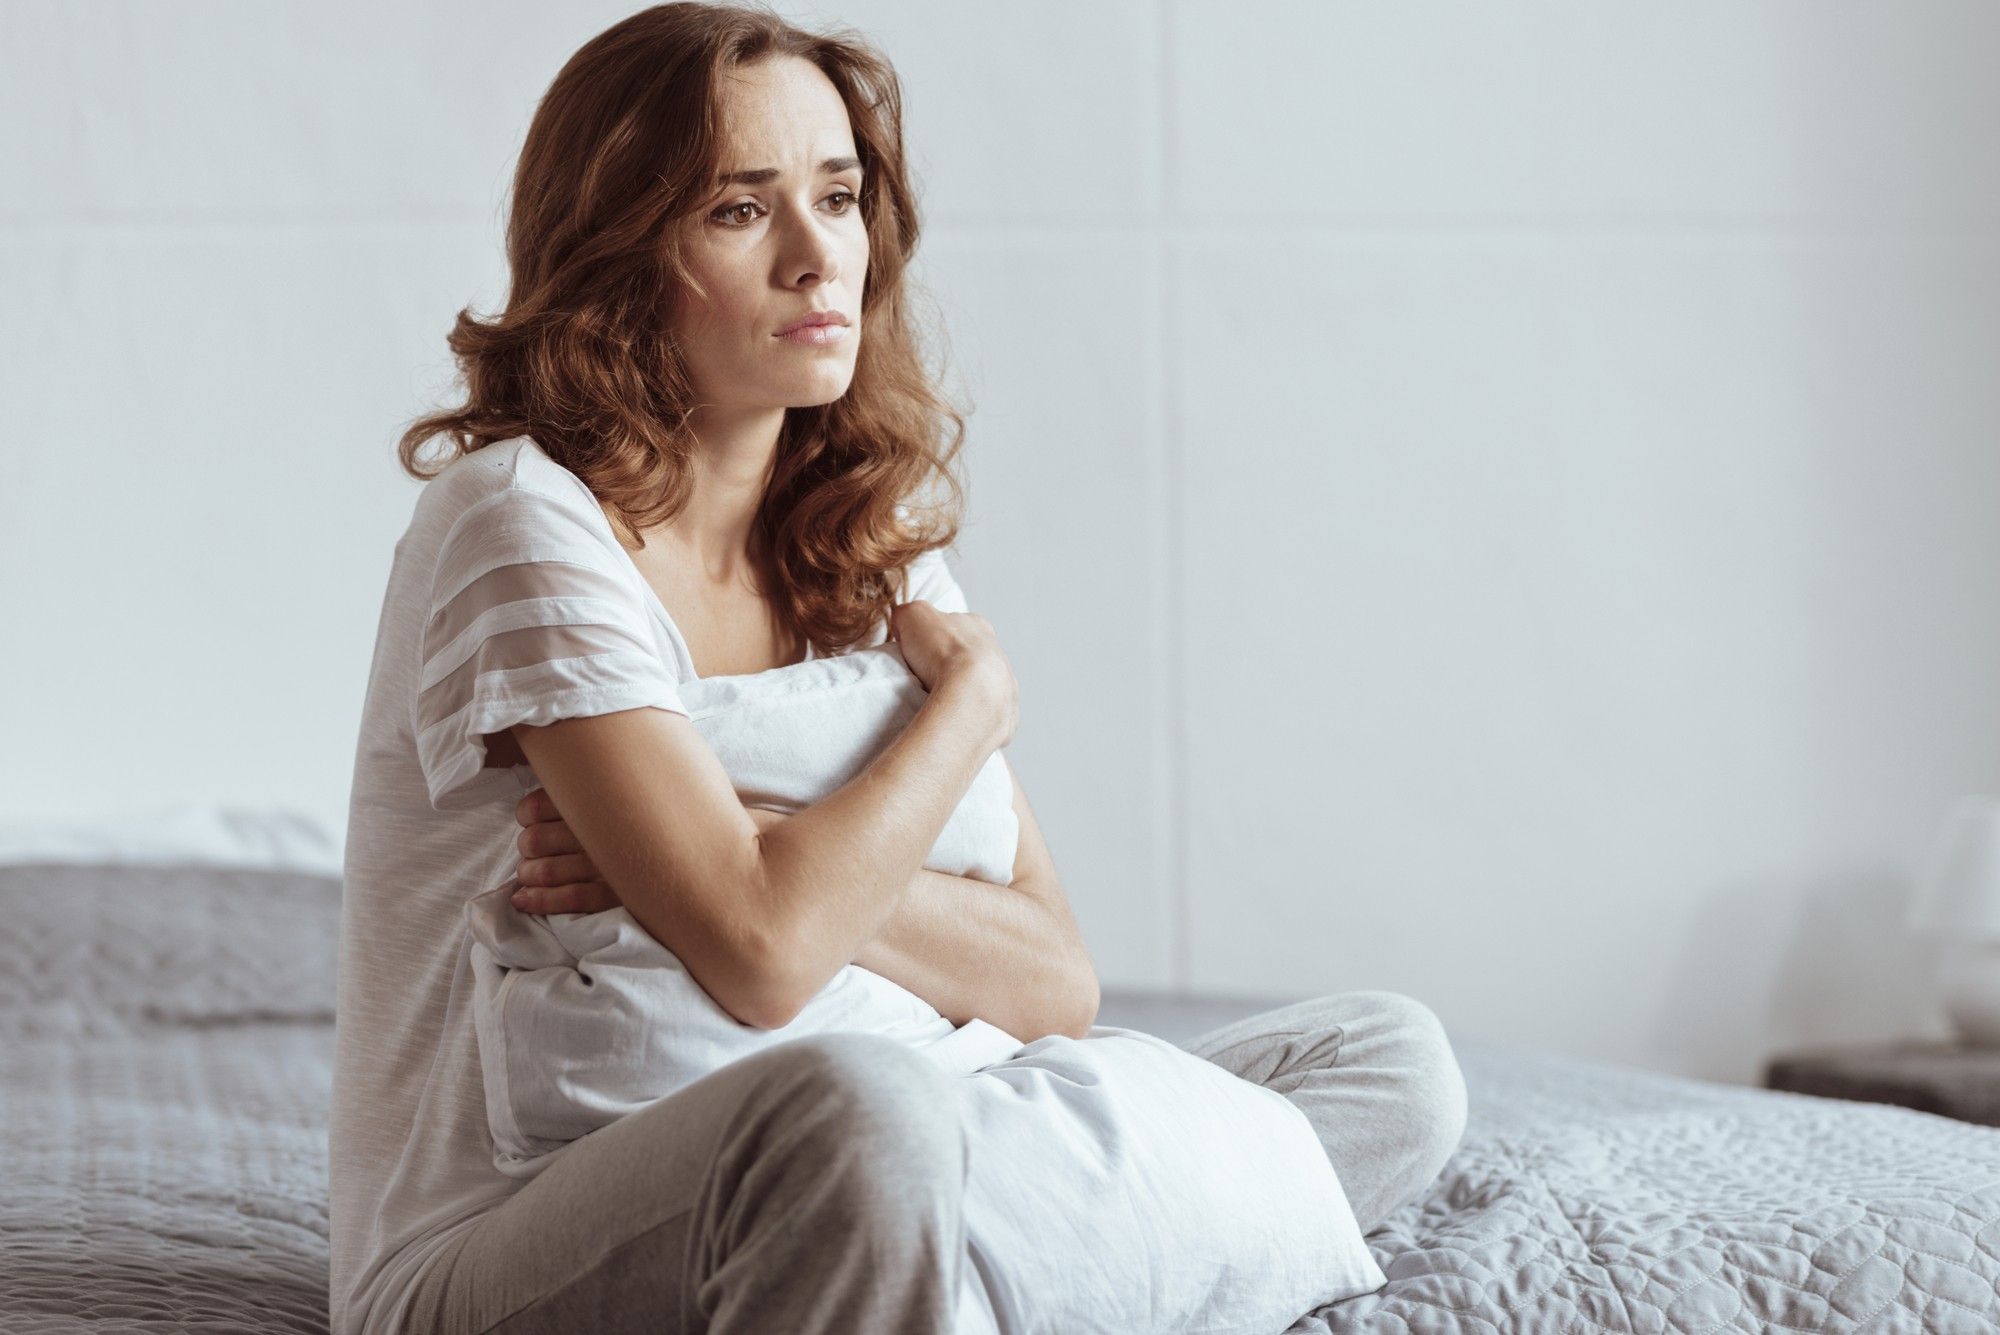 Serious woman sits and hugs pillow as she thinks